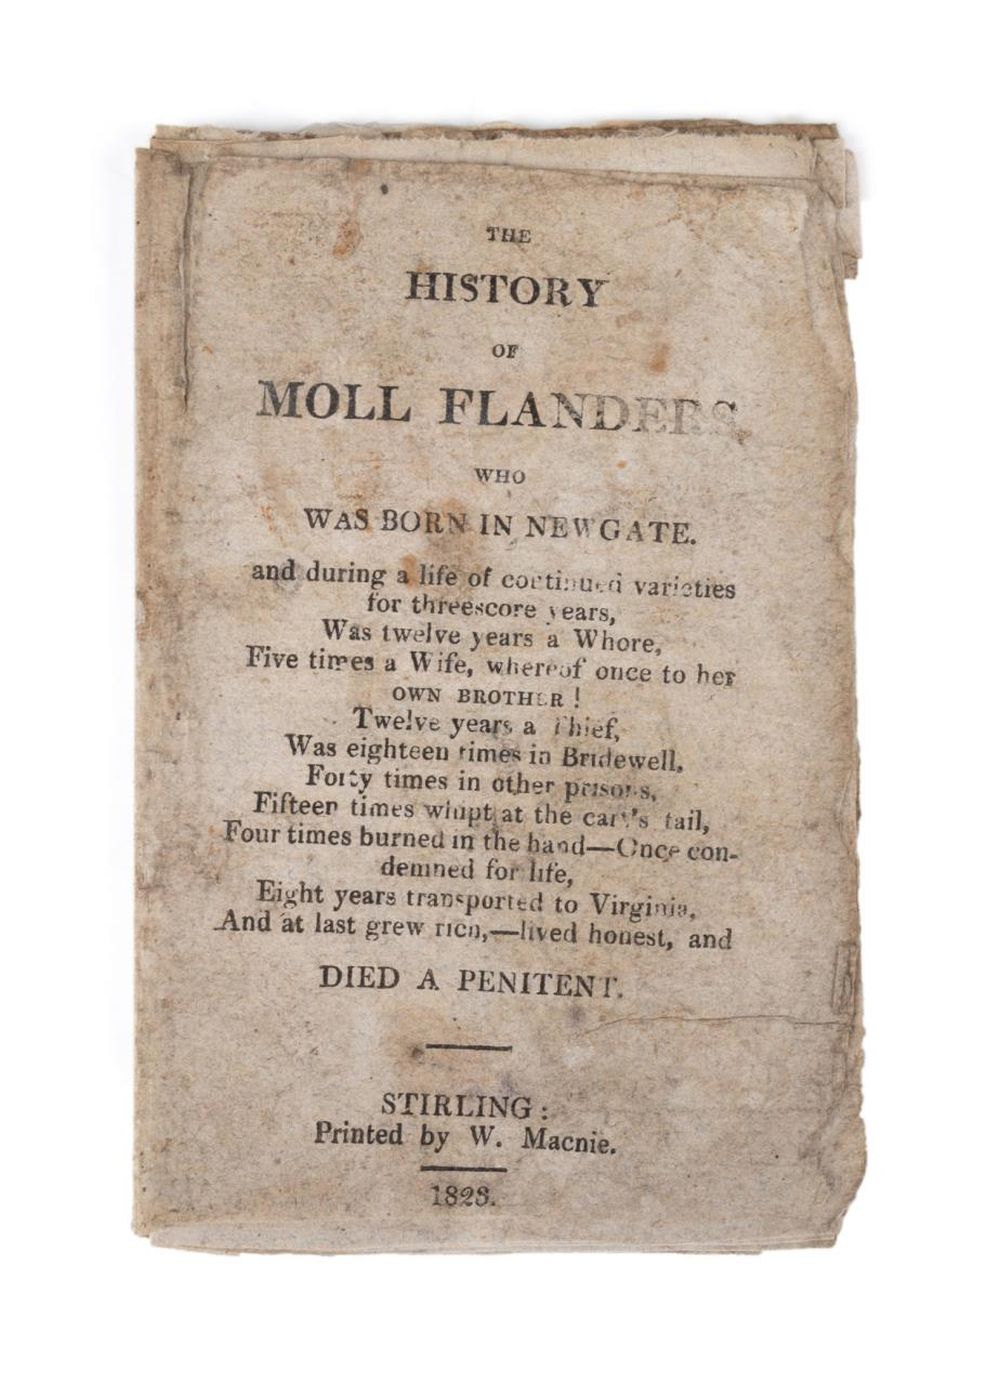 THE HISTORY OF MOLL FLANDERS PAMPHLET  3cd76a